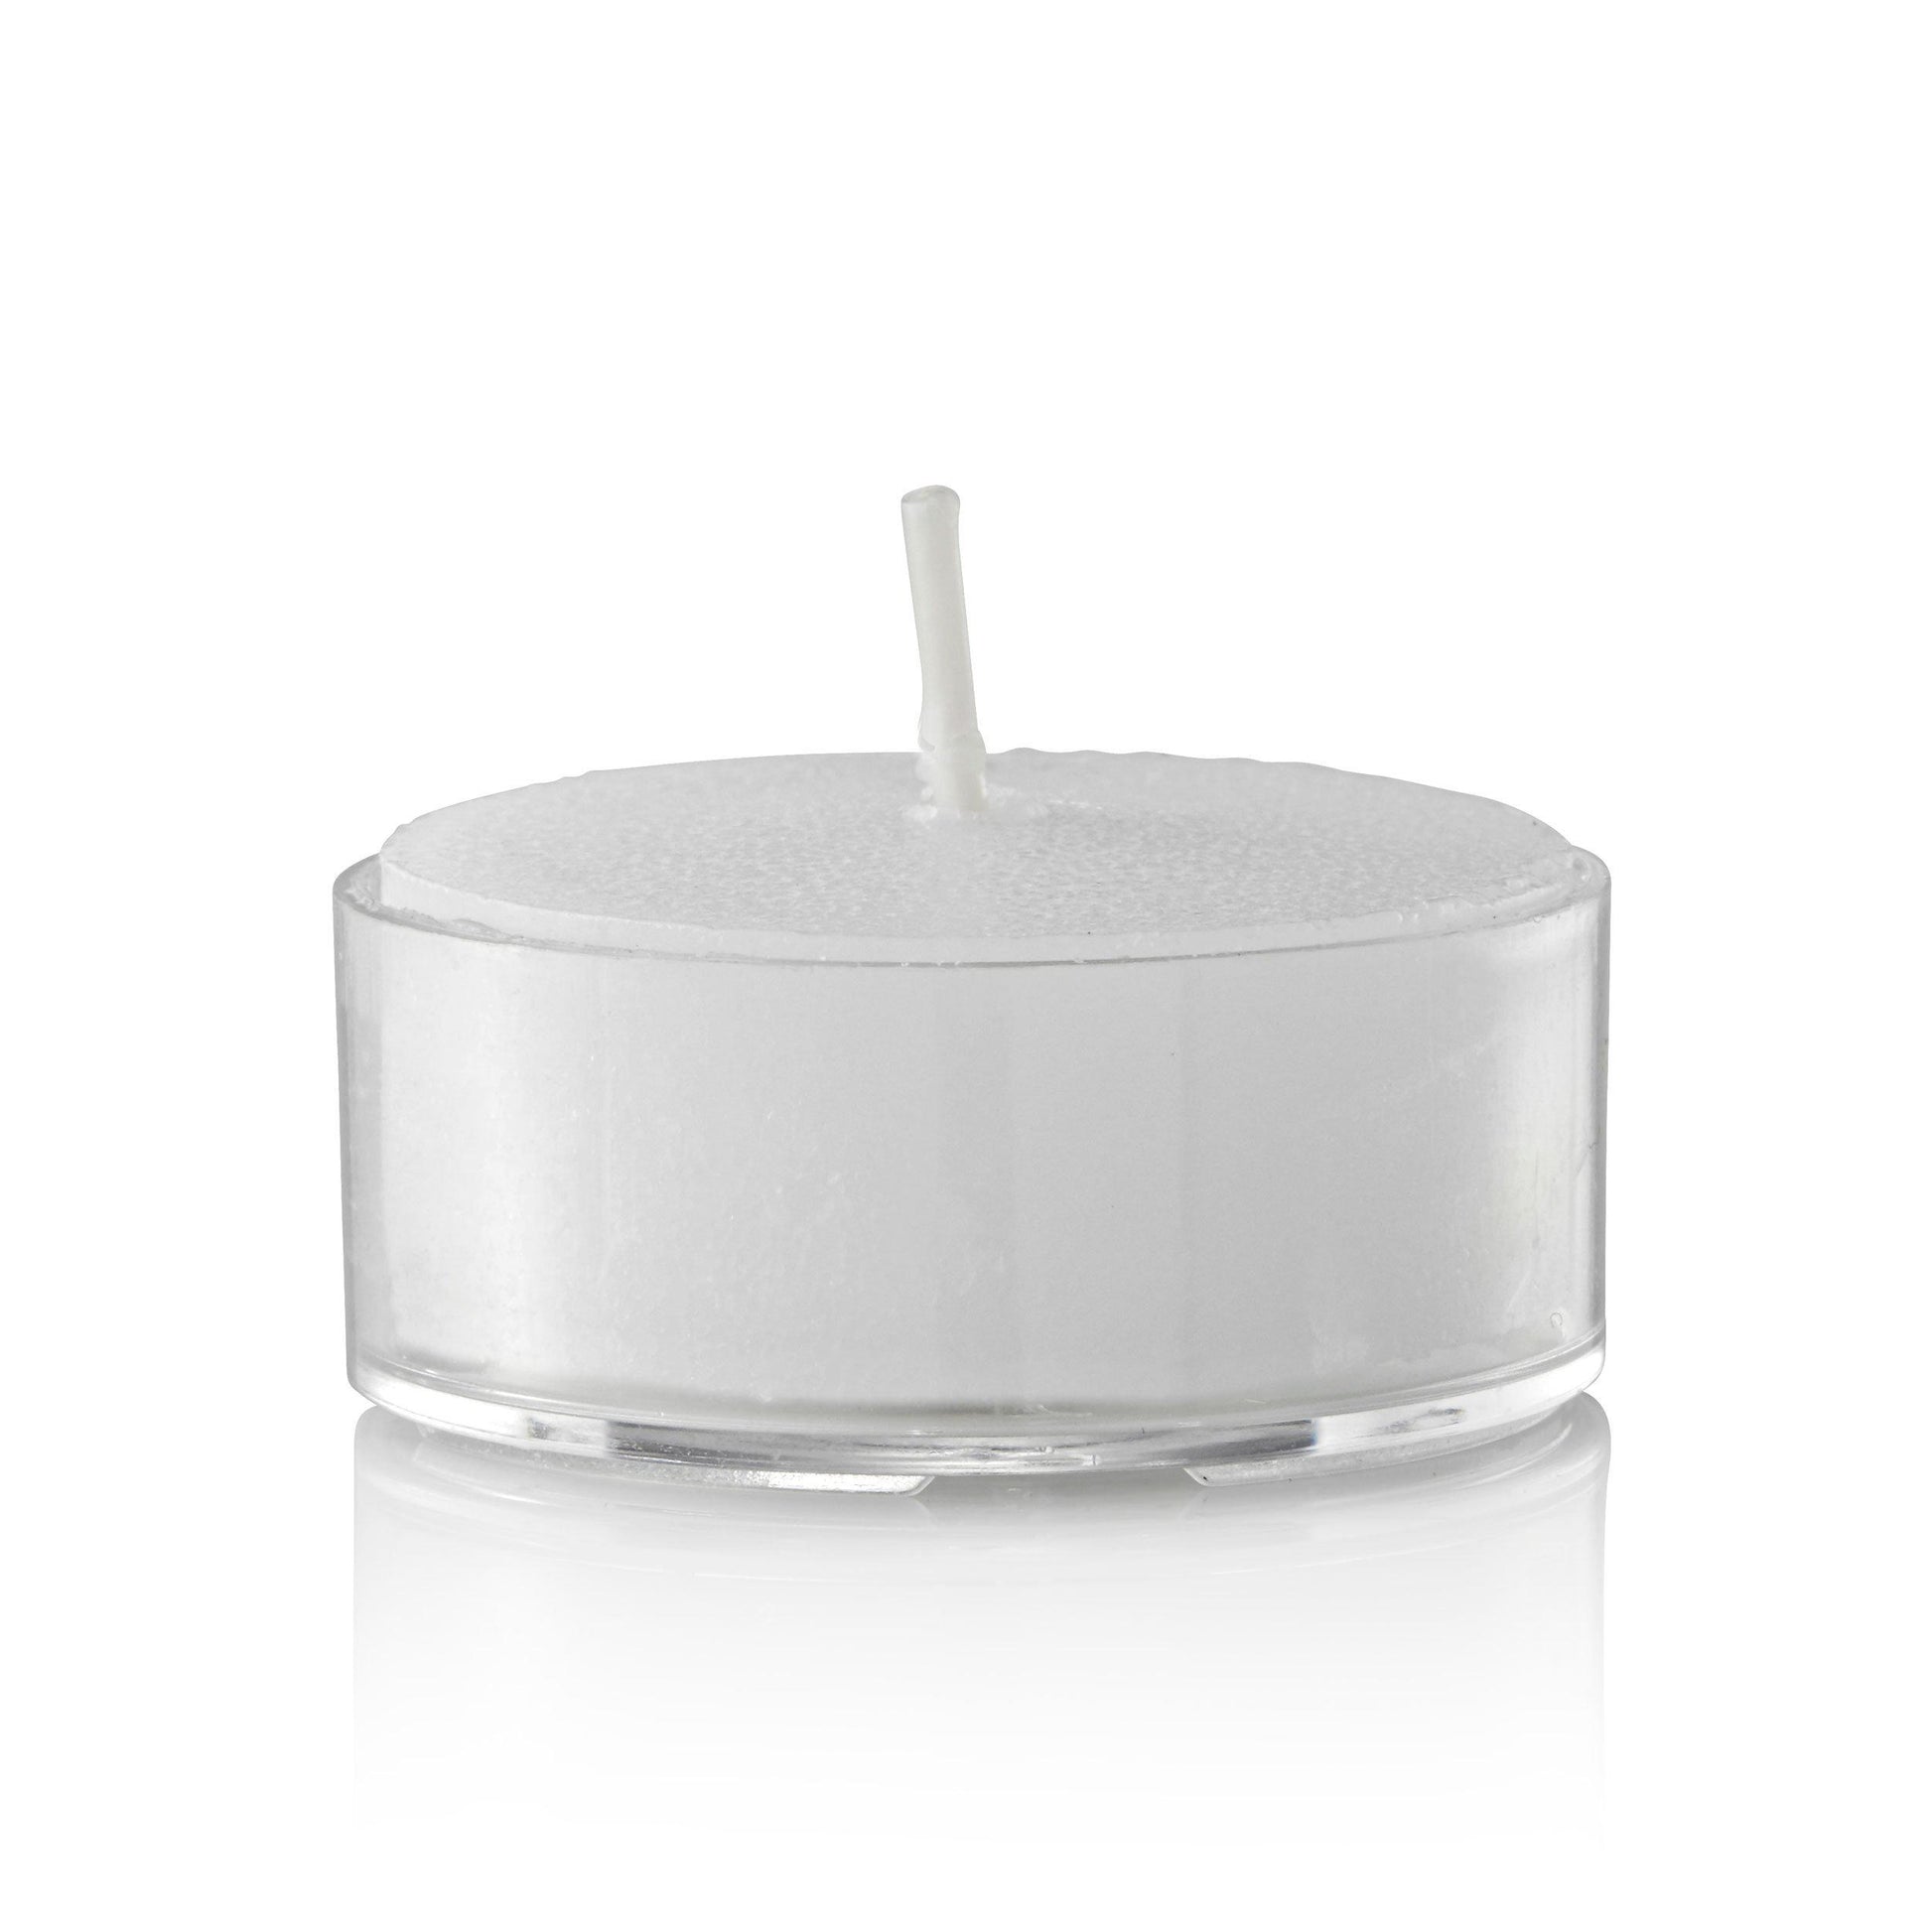 5 Hour Tealight Candles in Plastic Cups, White, Unscented, Set of 500-tealight candles-TableTopLighting.com